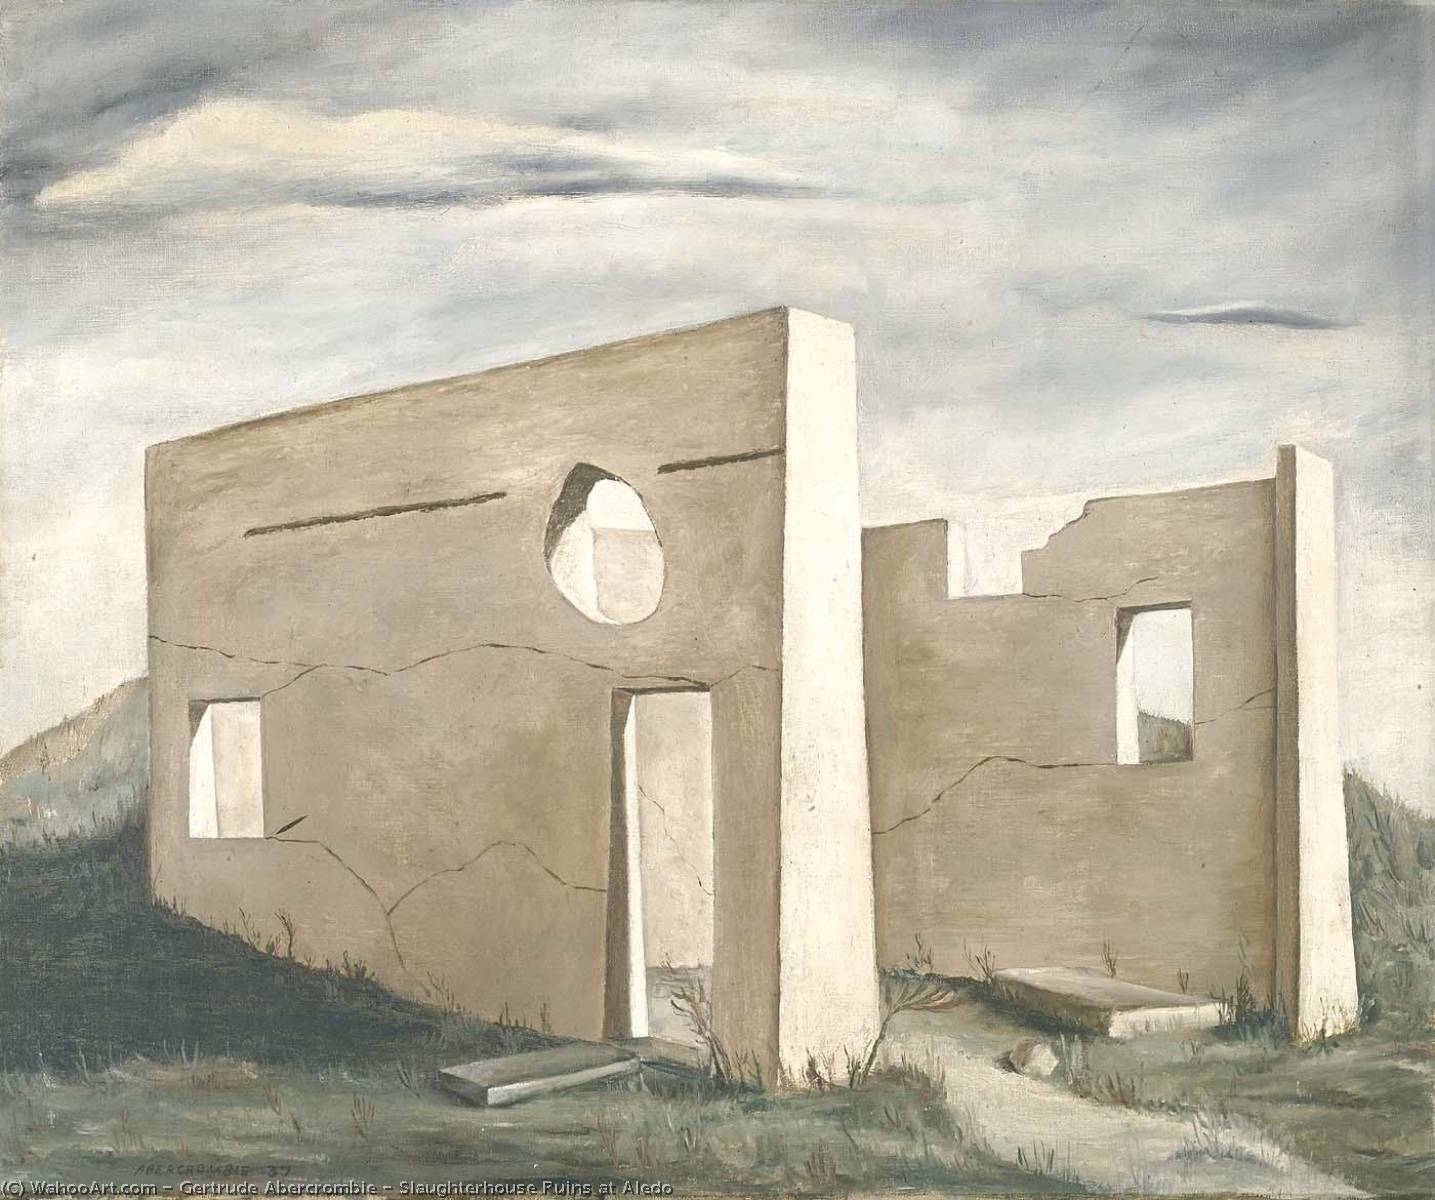 Order Artwork Replica Slaughterhouse Ruins at Aledo, 1937 by Gertrude Abercrombie (Inspired By) (1909-1977, United States) | ArtsDot.com